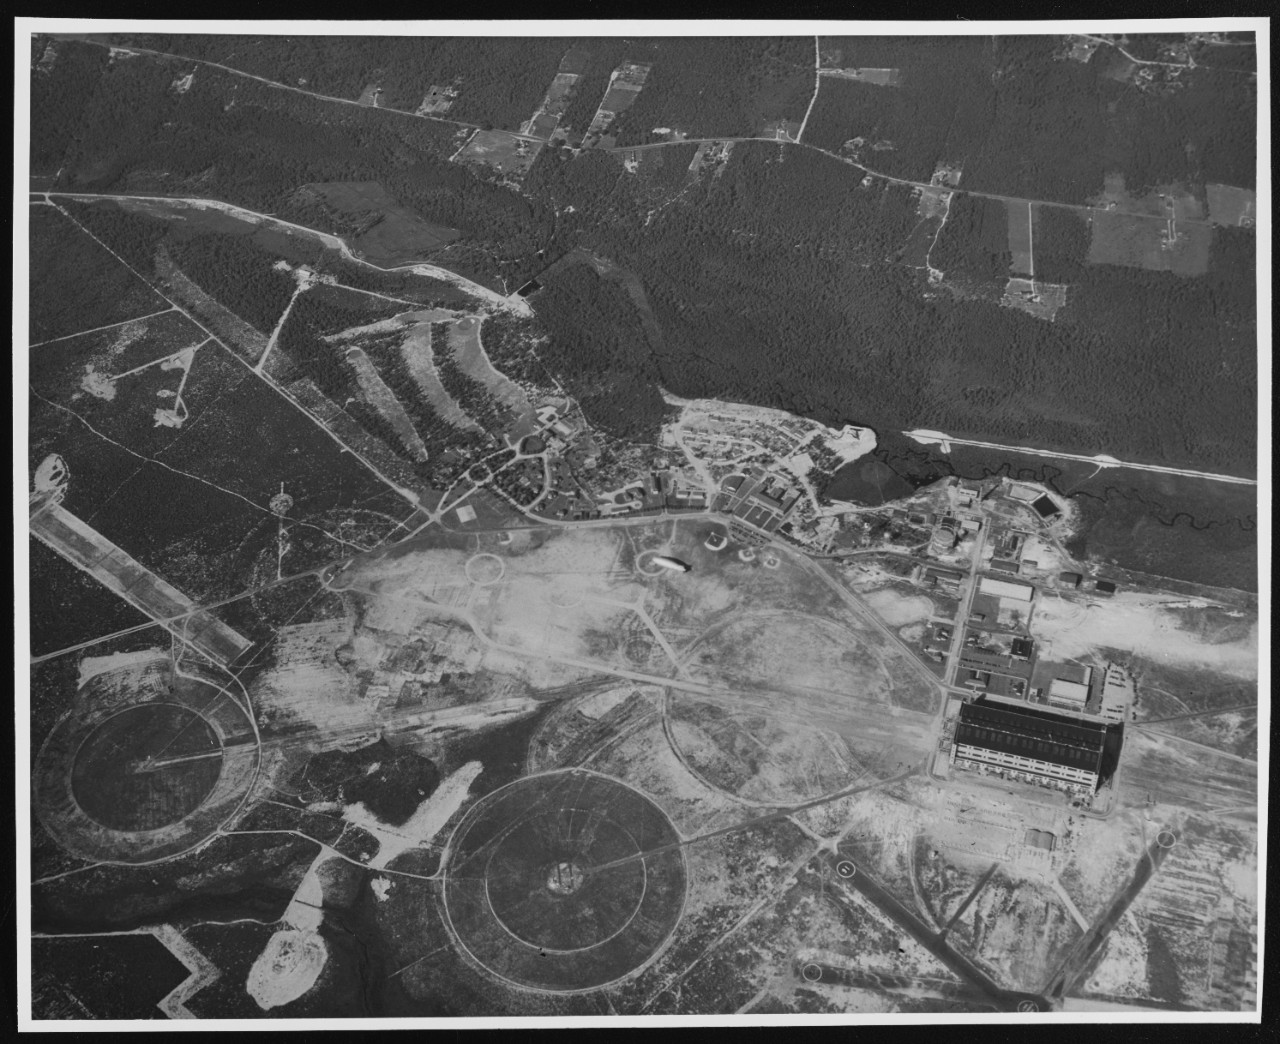 Aerial view of U.S. Naval Air Station, Lakehurst, New Jersey